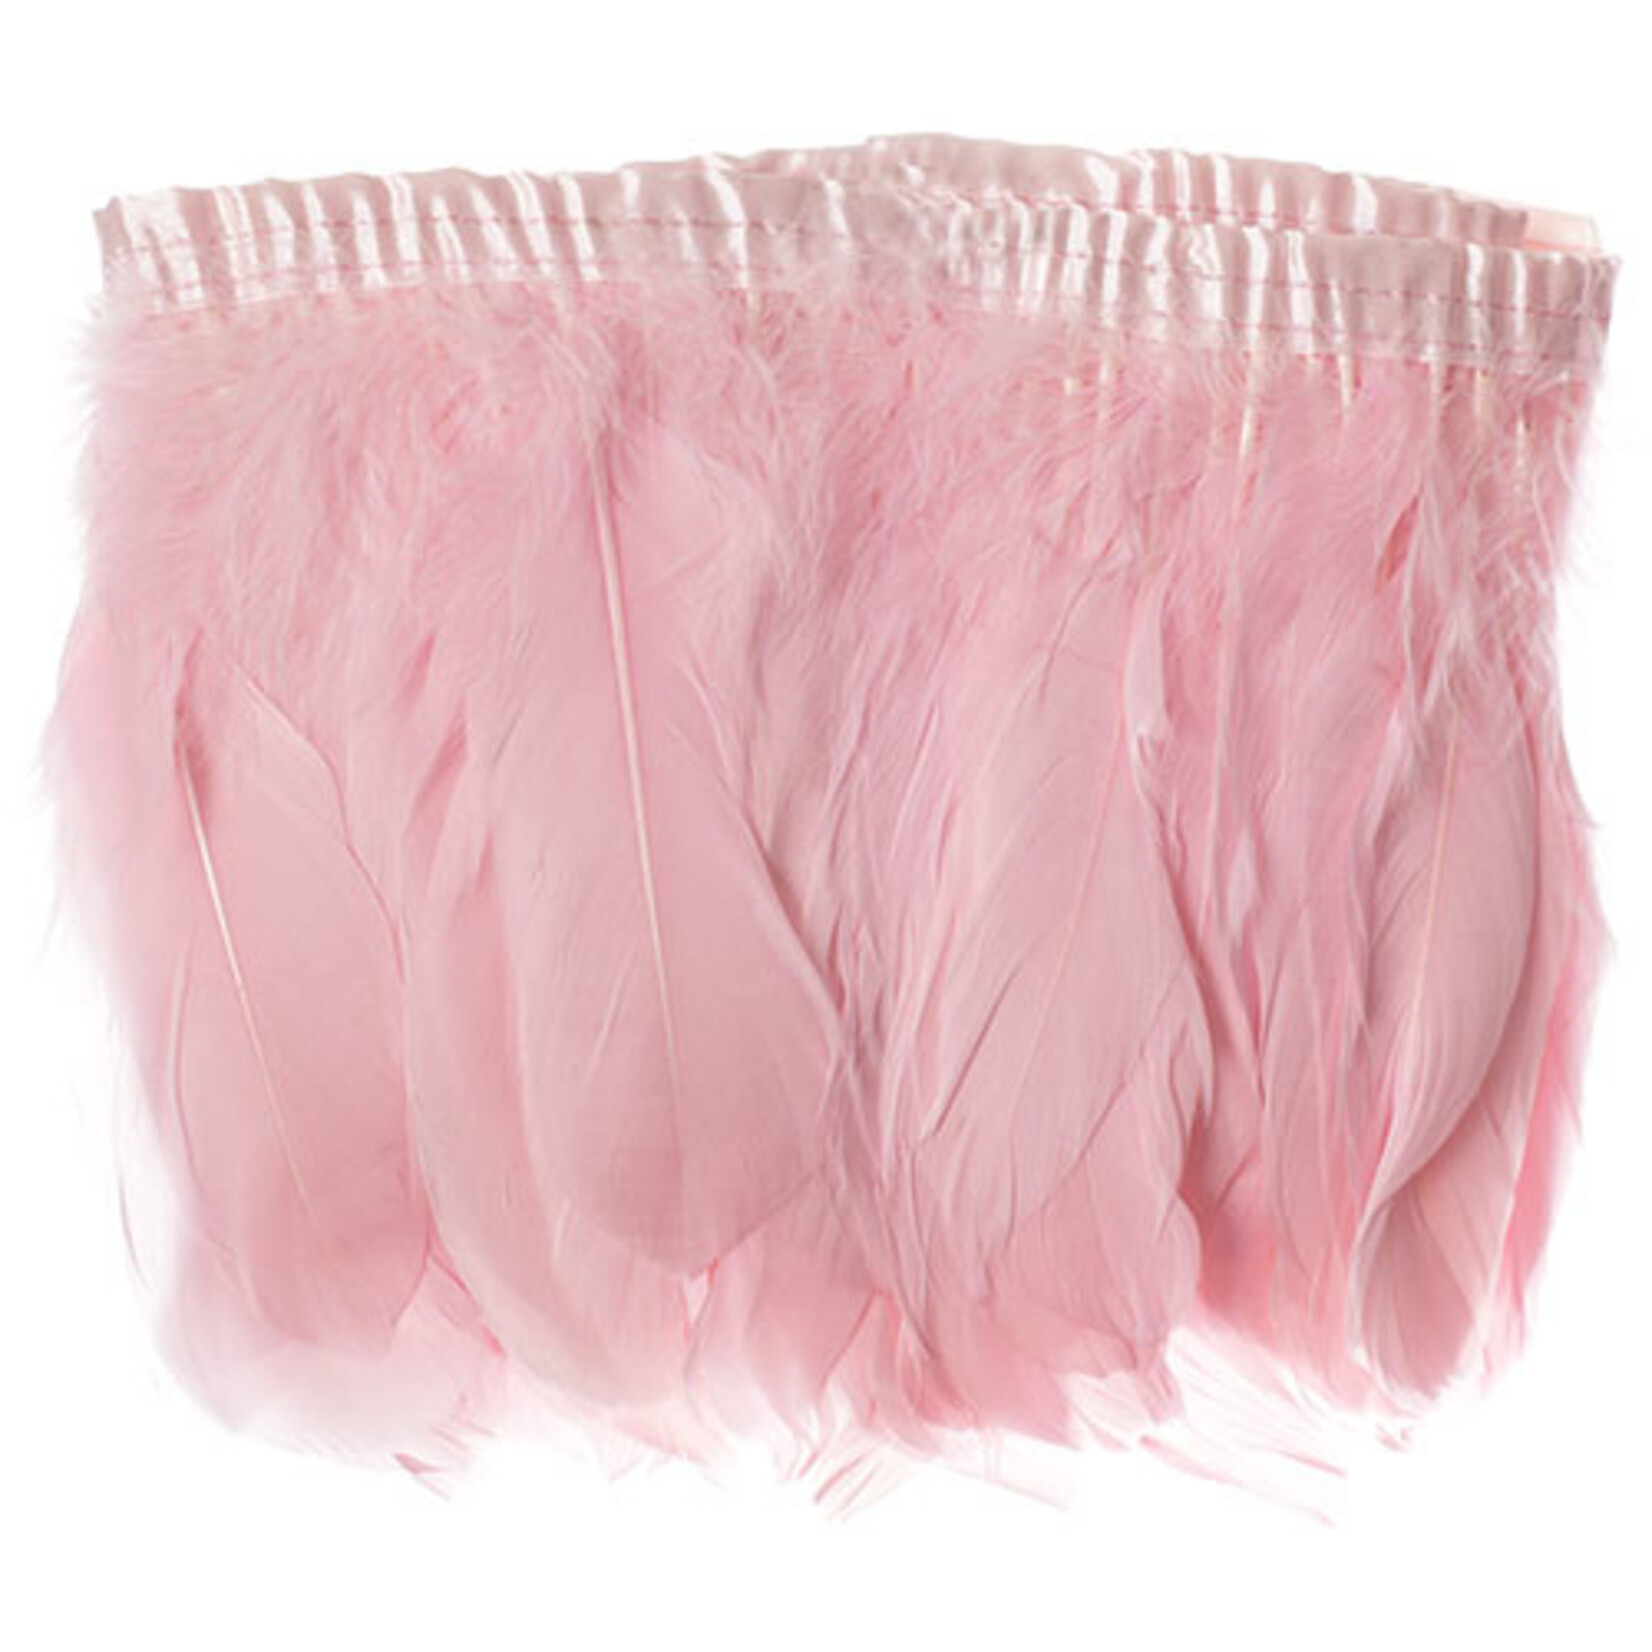 Goose Feather Strung 5.5-7 inches (2 yards) Baby Pink